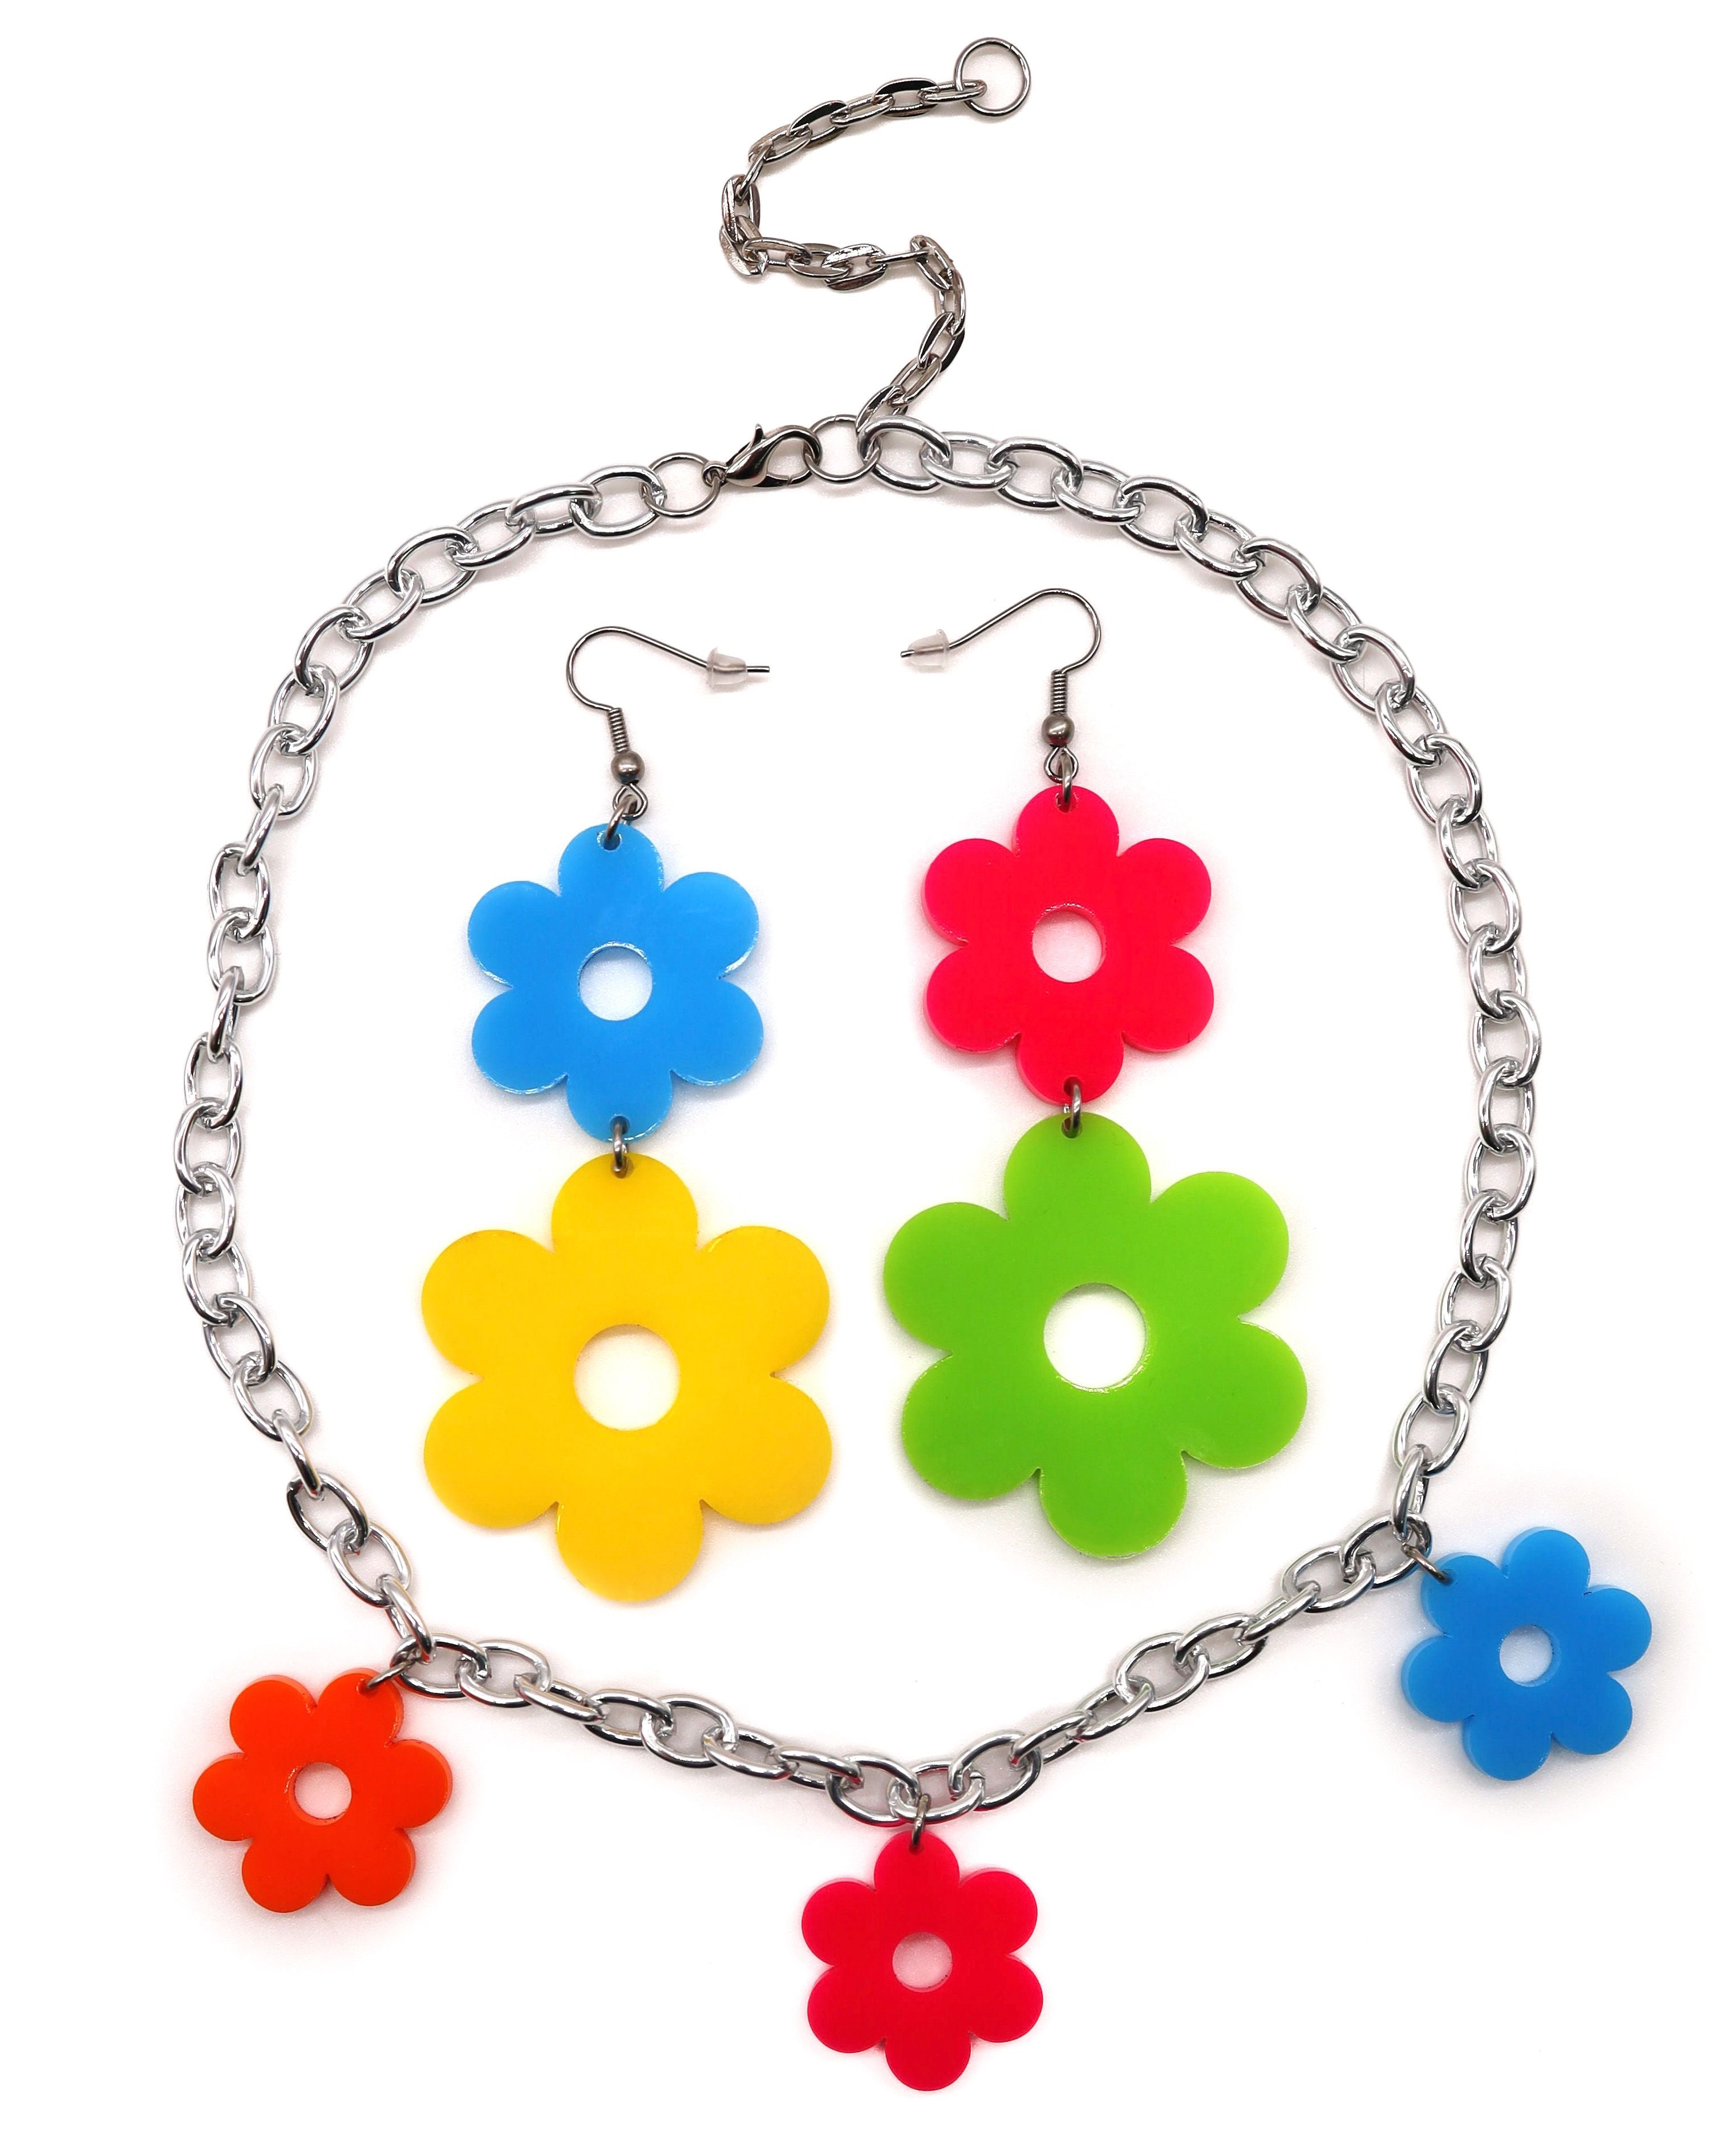 Flower Power Kandi Earrings with the matching Flower Power Kandi Necklace.